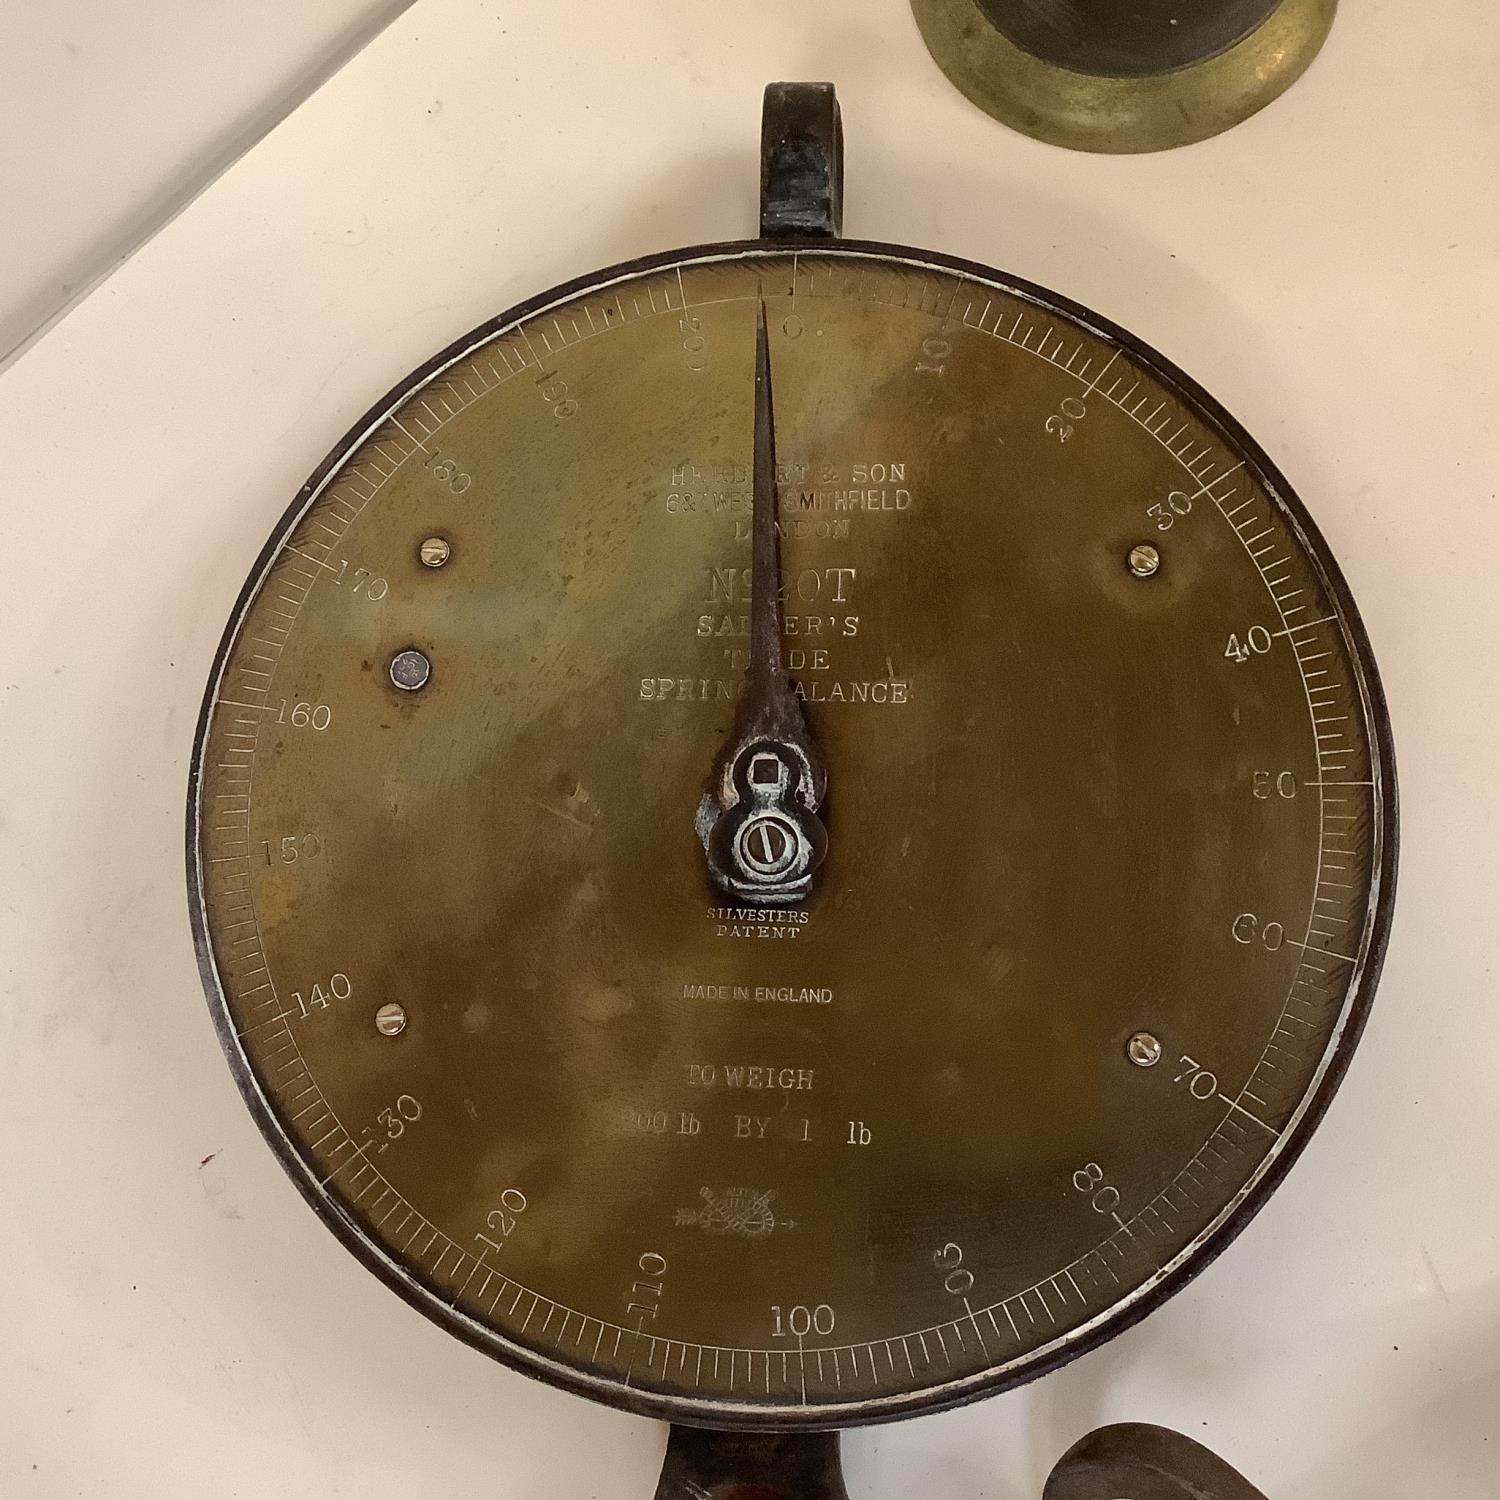 Set of industrial hanging scales, Salter, number 20T, retailed by Herbert & Son, Brass face with - Bild 3 aus 3